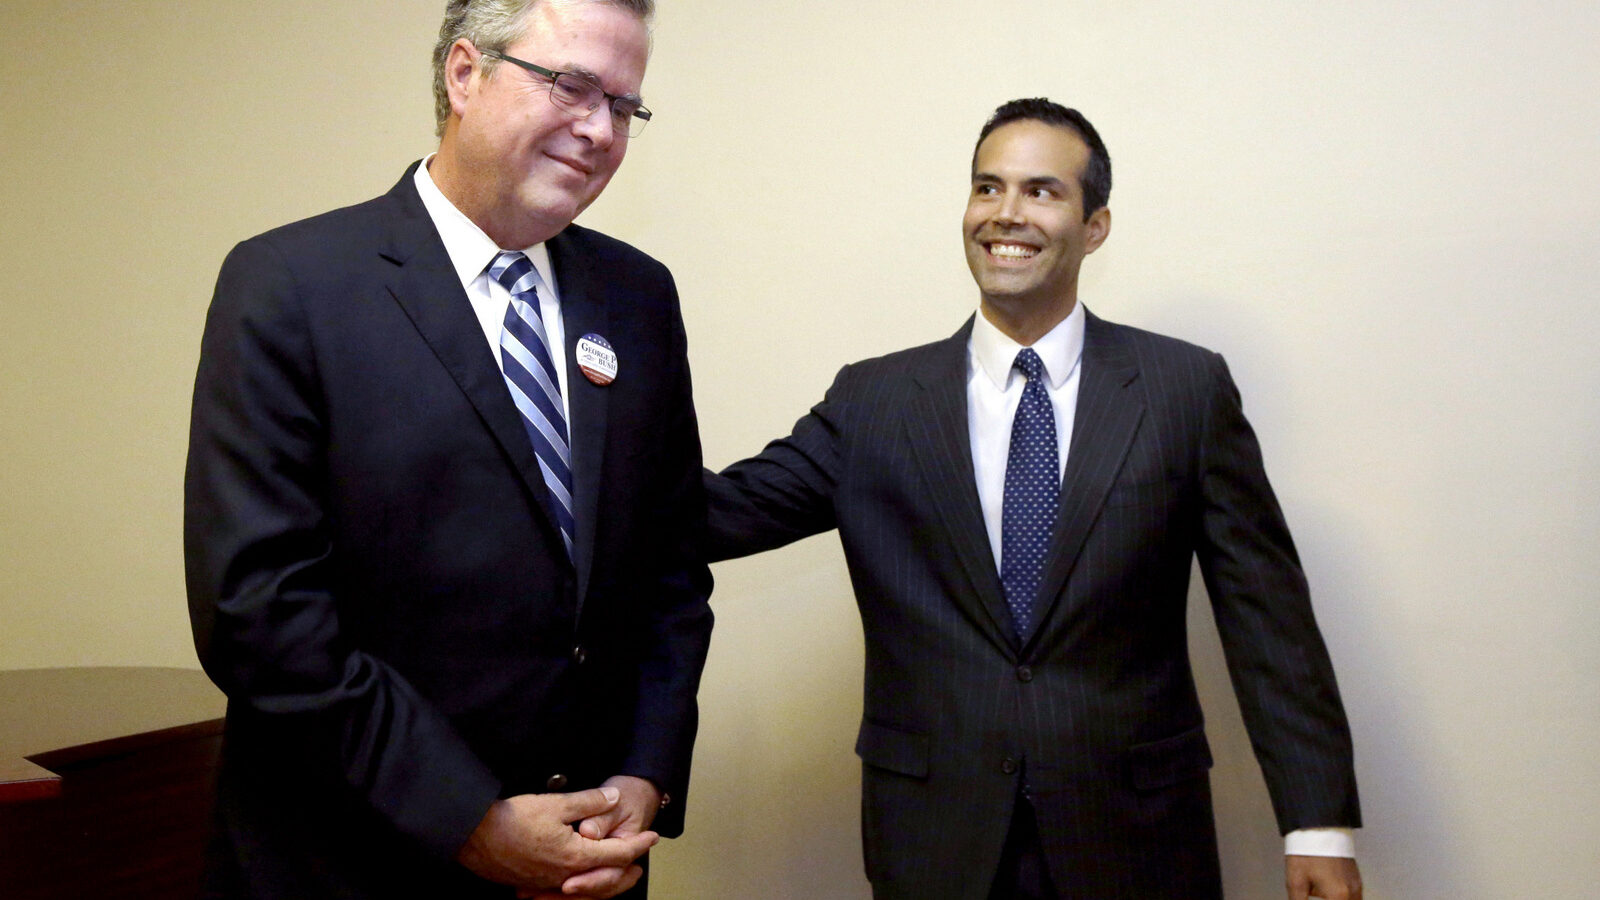 File - In this Oct. 4, 2014 file photo, George P. Bush, right, reaches to his father former Florida Gov. Jeb Bush after the senior Bush became emotional when expressing his pride for his son while speaking to supporters at Hardin-Simmons University, in Abilene, Texas. George P. Bush has been helping members of his famous family get elected since age 3 but has never played a larger role as a political surrogate than this cycle, as he tries to help his dad follow his grandfather, George H.W. Bush, and his uncle, George W. Bush, to the White House. (AP Photo/LM Otero, File)